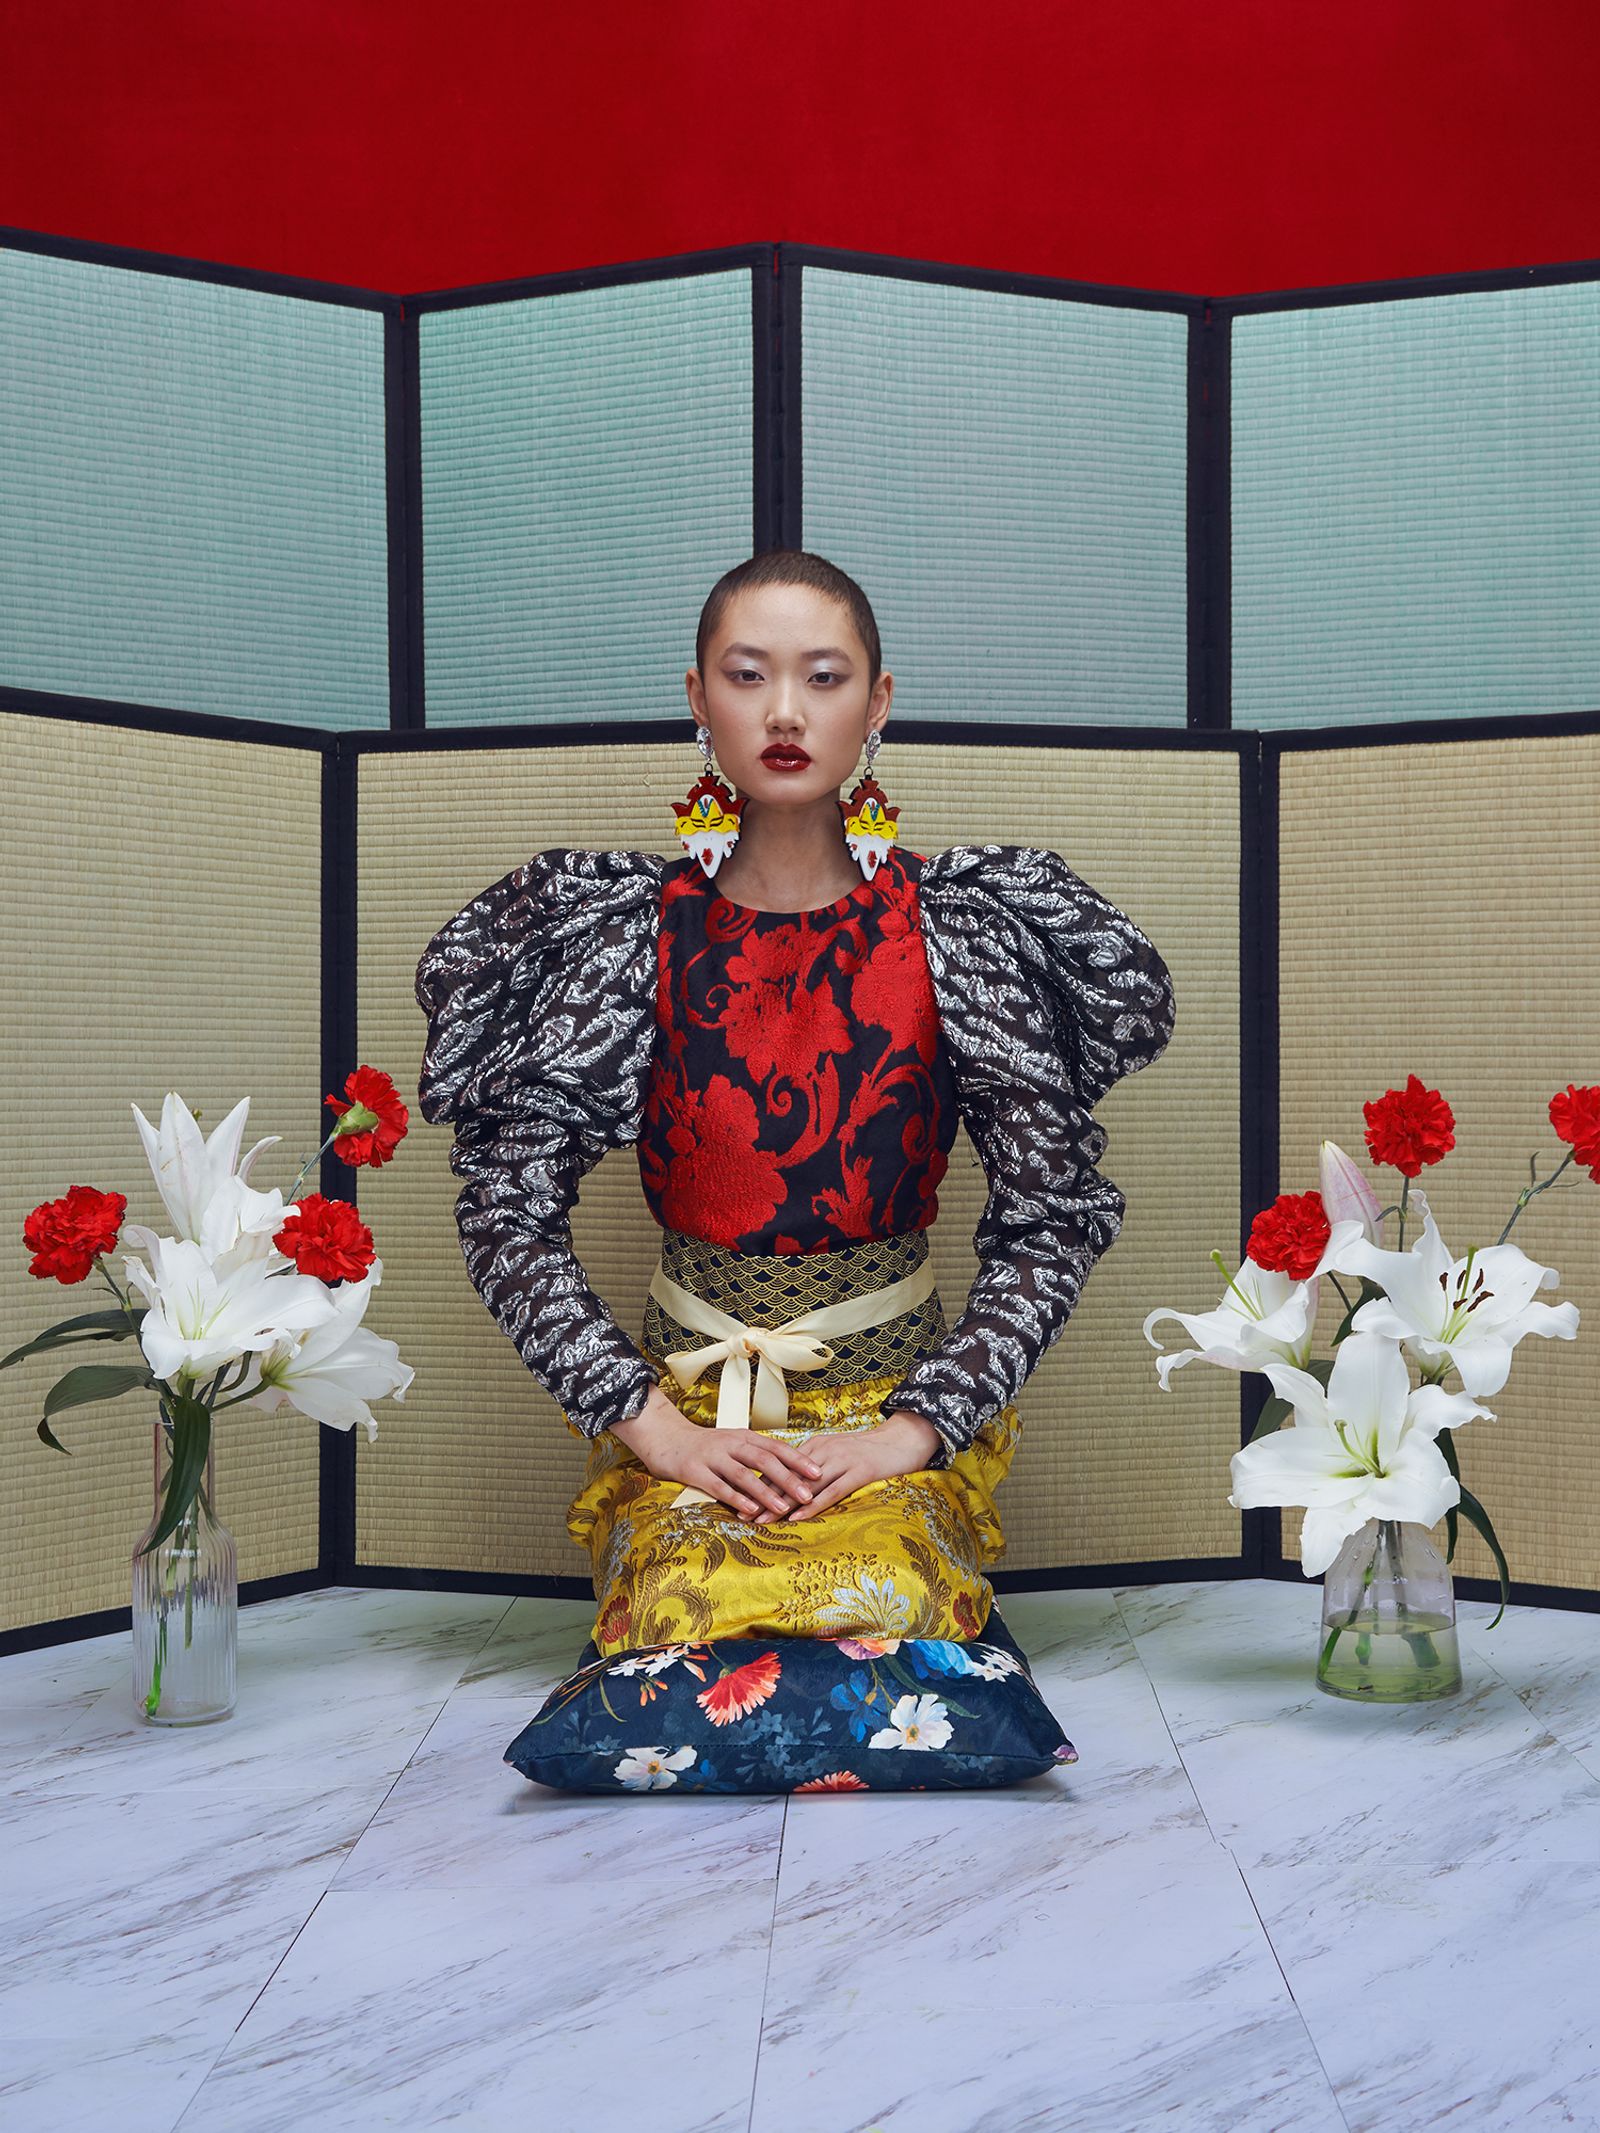 © Michelle Watt - Image from the Lunar Geisha photography project